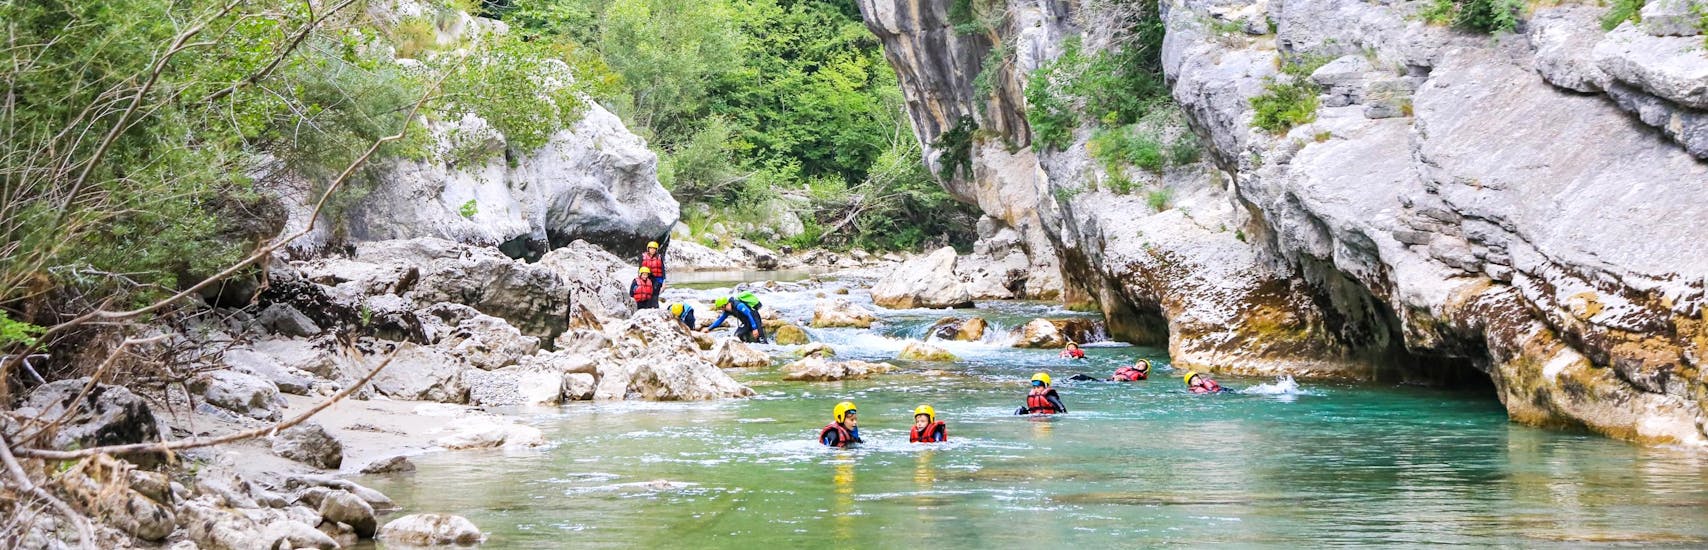 Group during River Trekking at Pont de Tusset in Verdon for Families with Yeti Rafting Verdon.